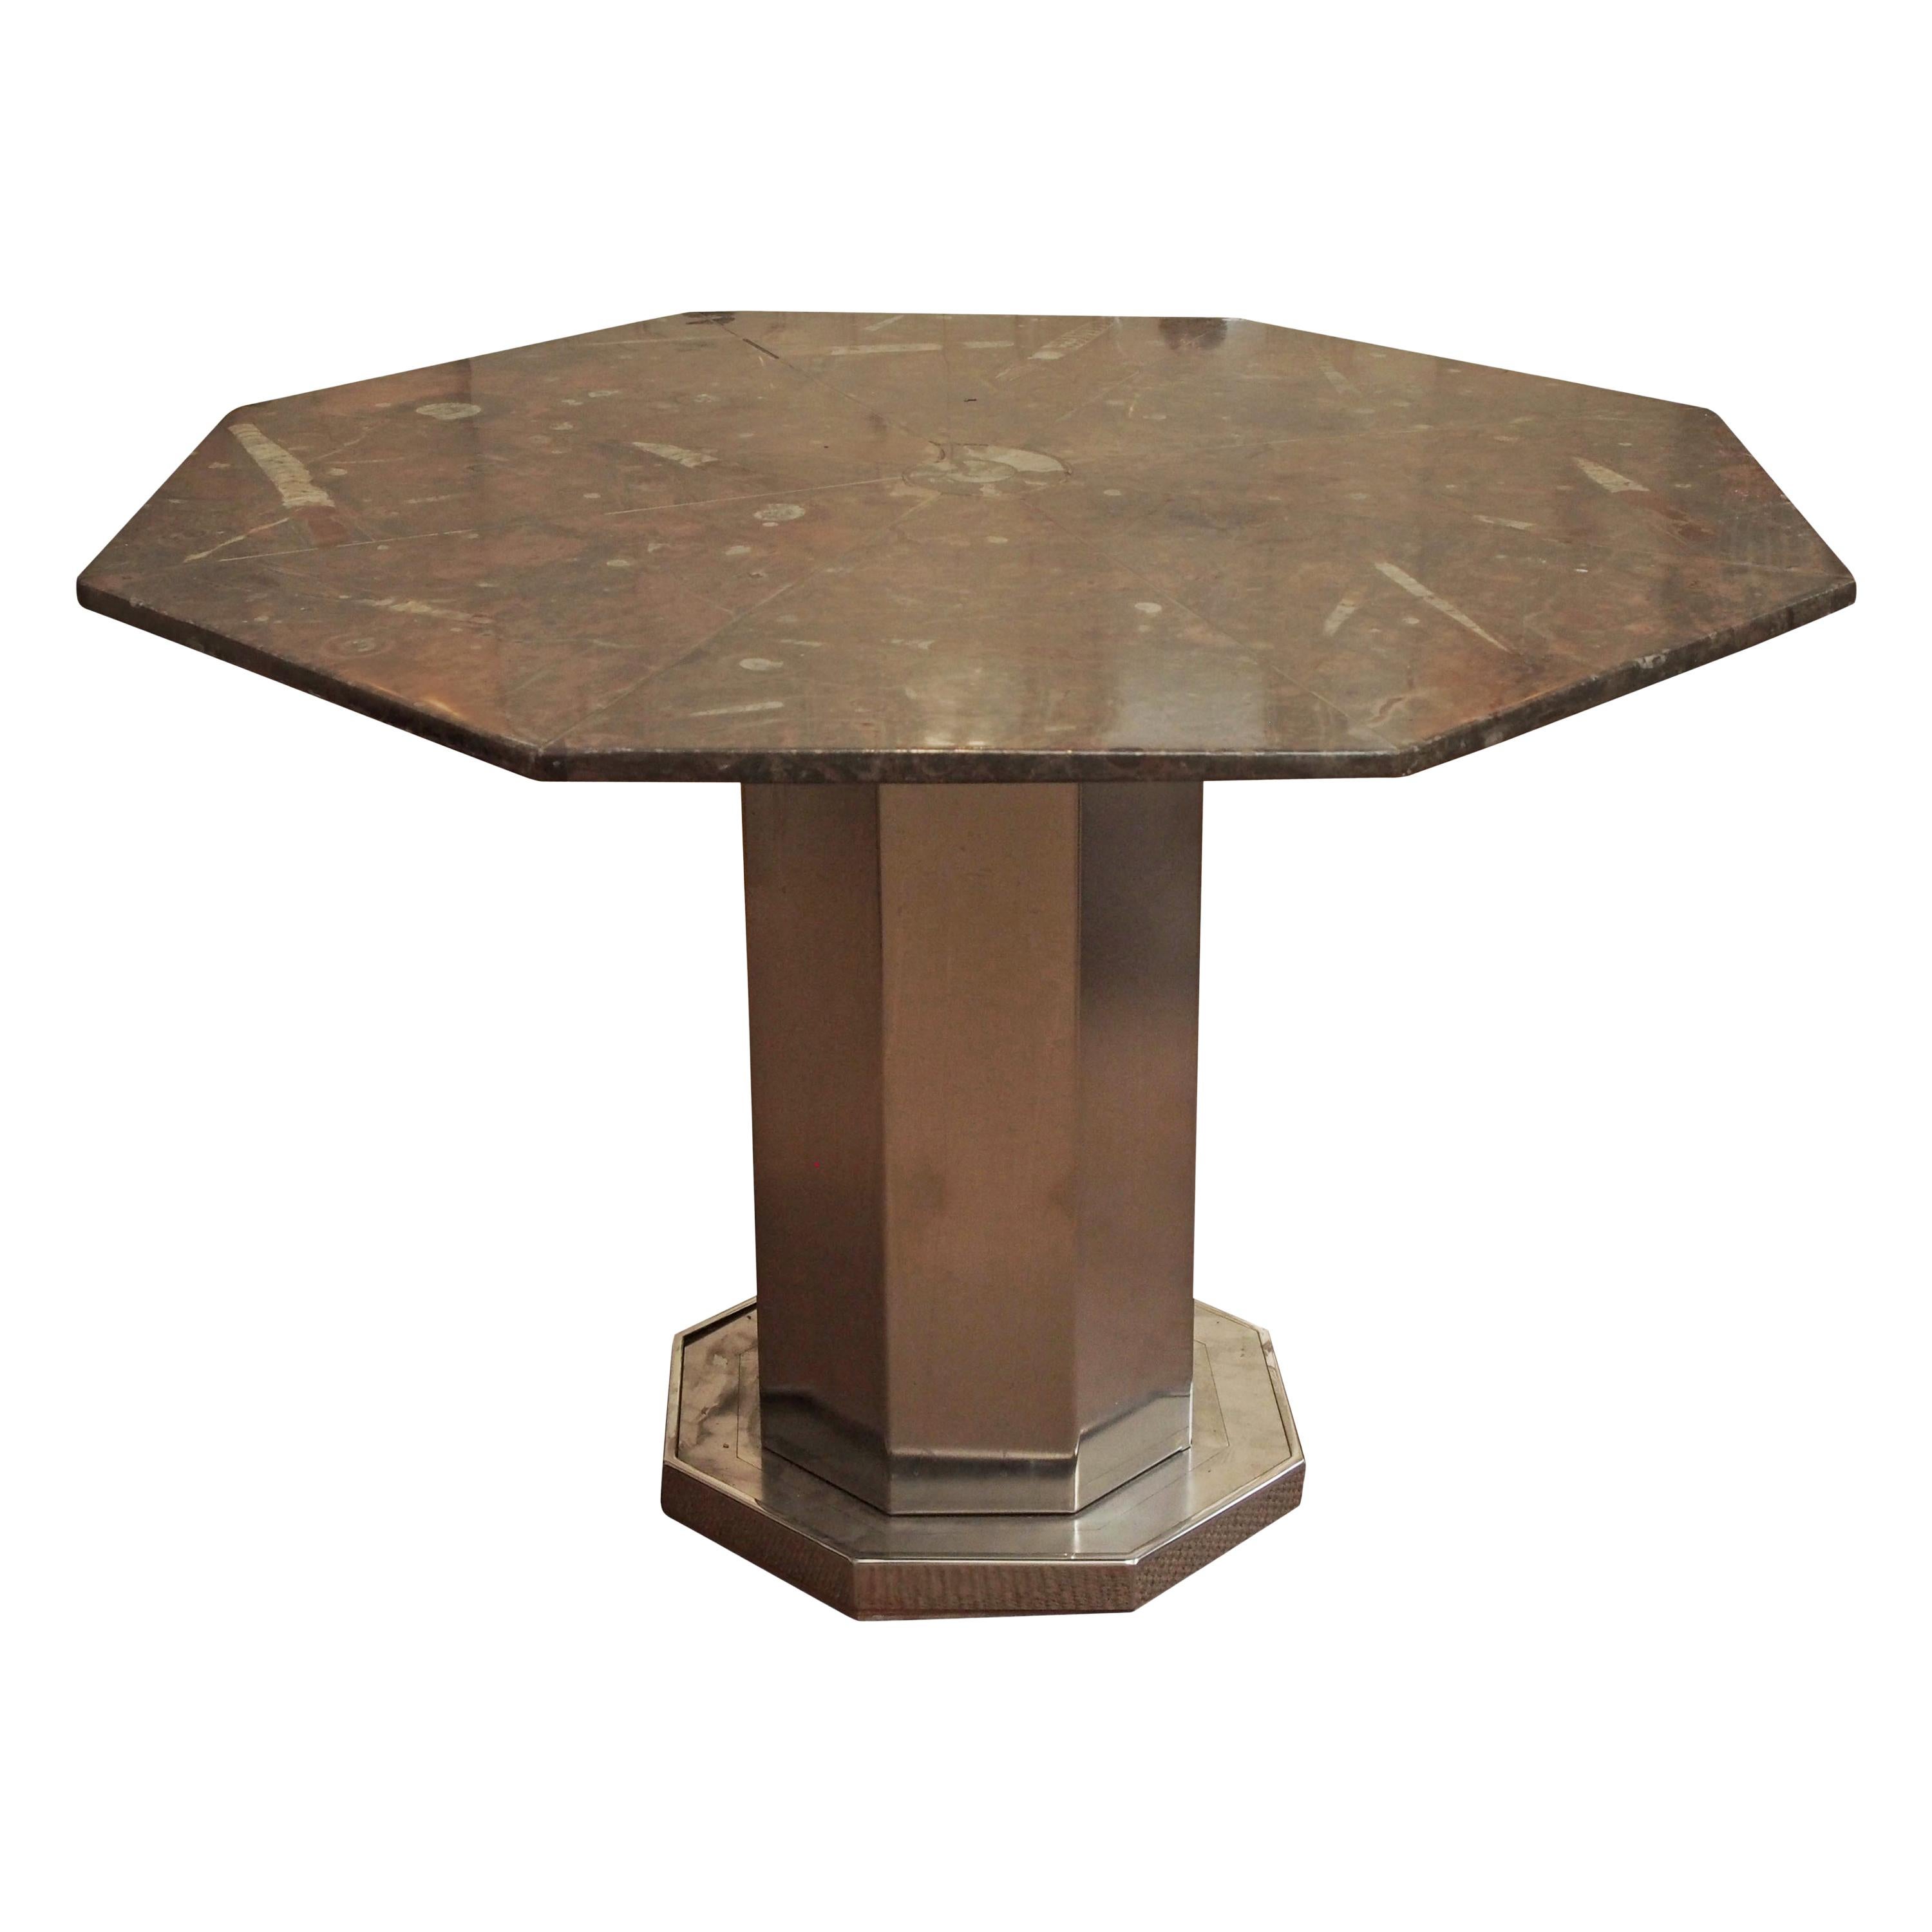 Midcentury Octagonal Table of Fossil Marble with Metal Base, Origin of France